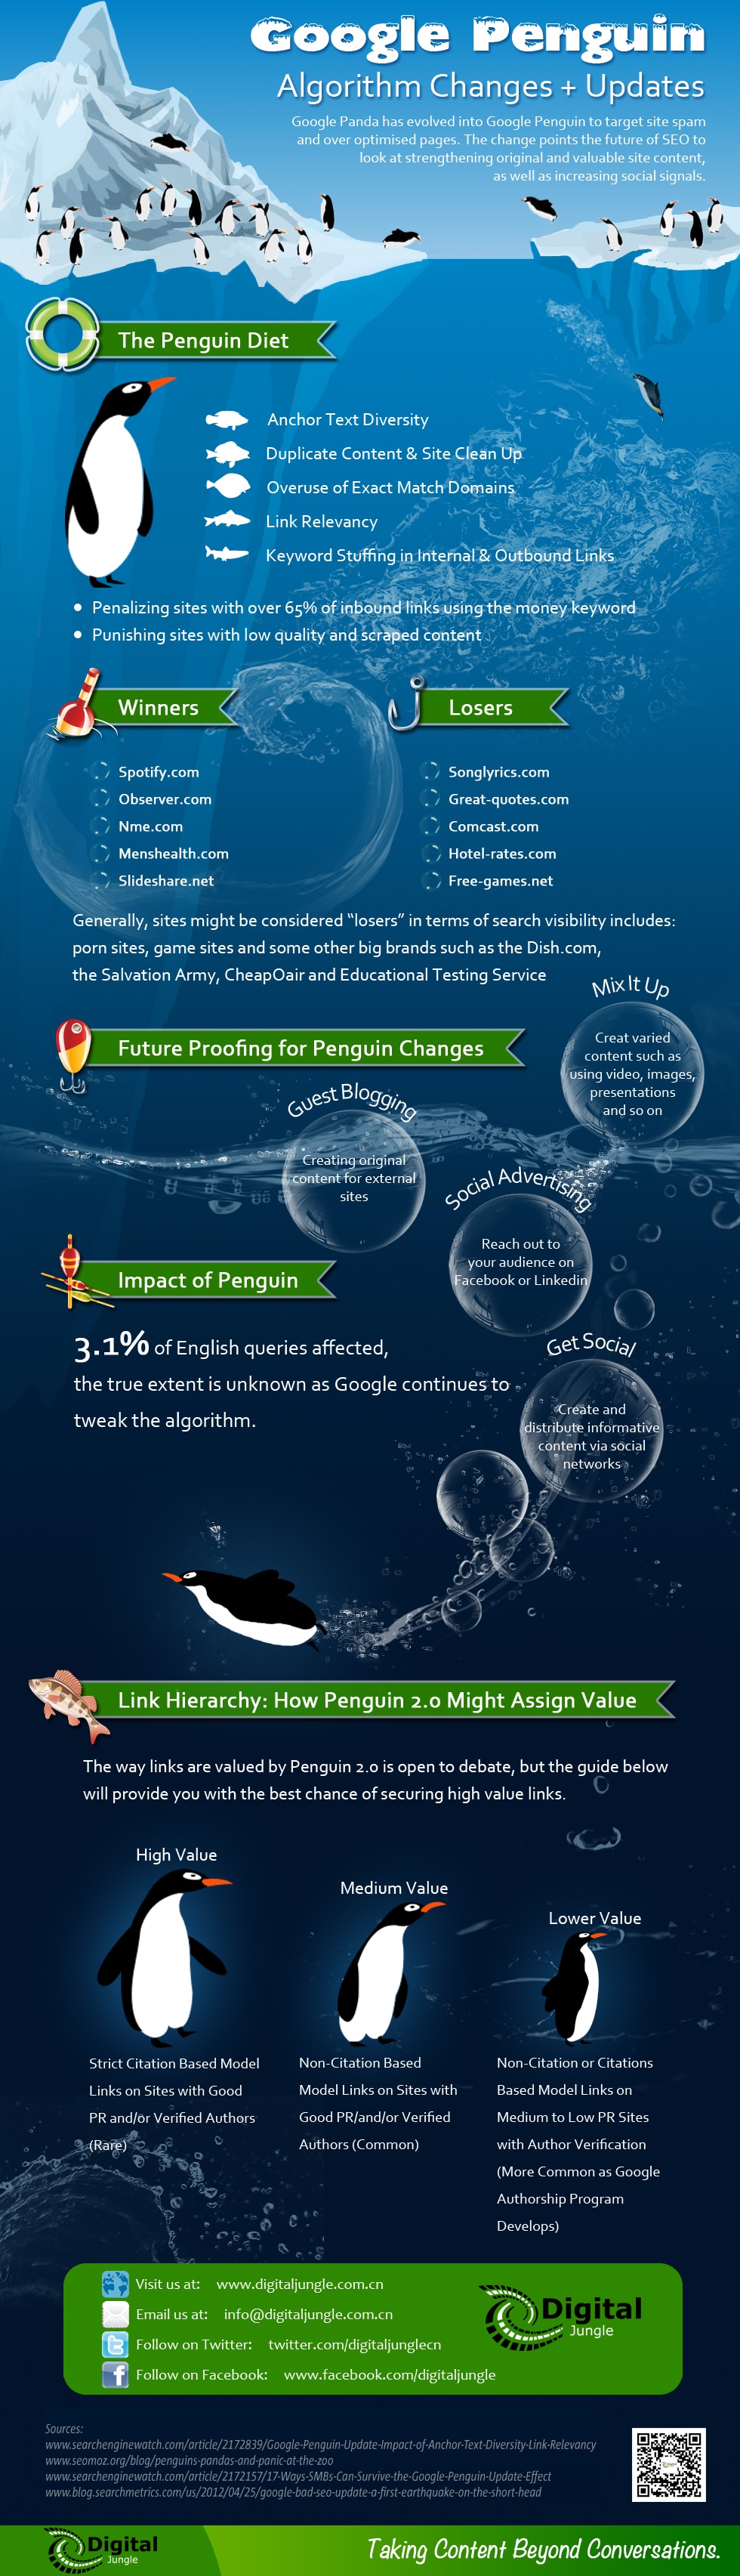 Google Penguin Update: The Winners & Losers [Infographic]